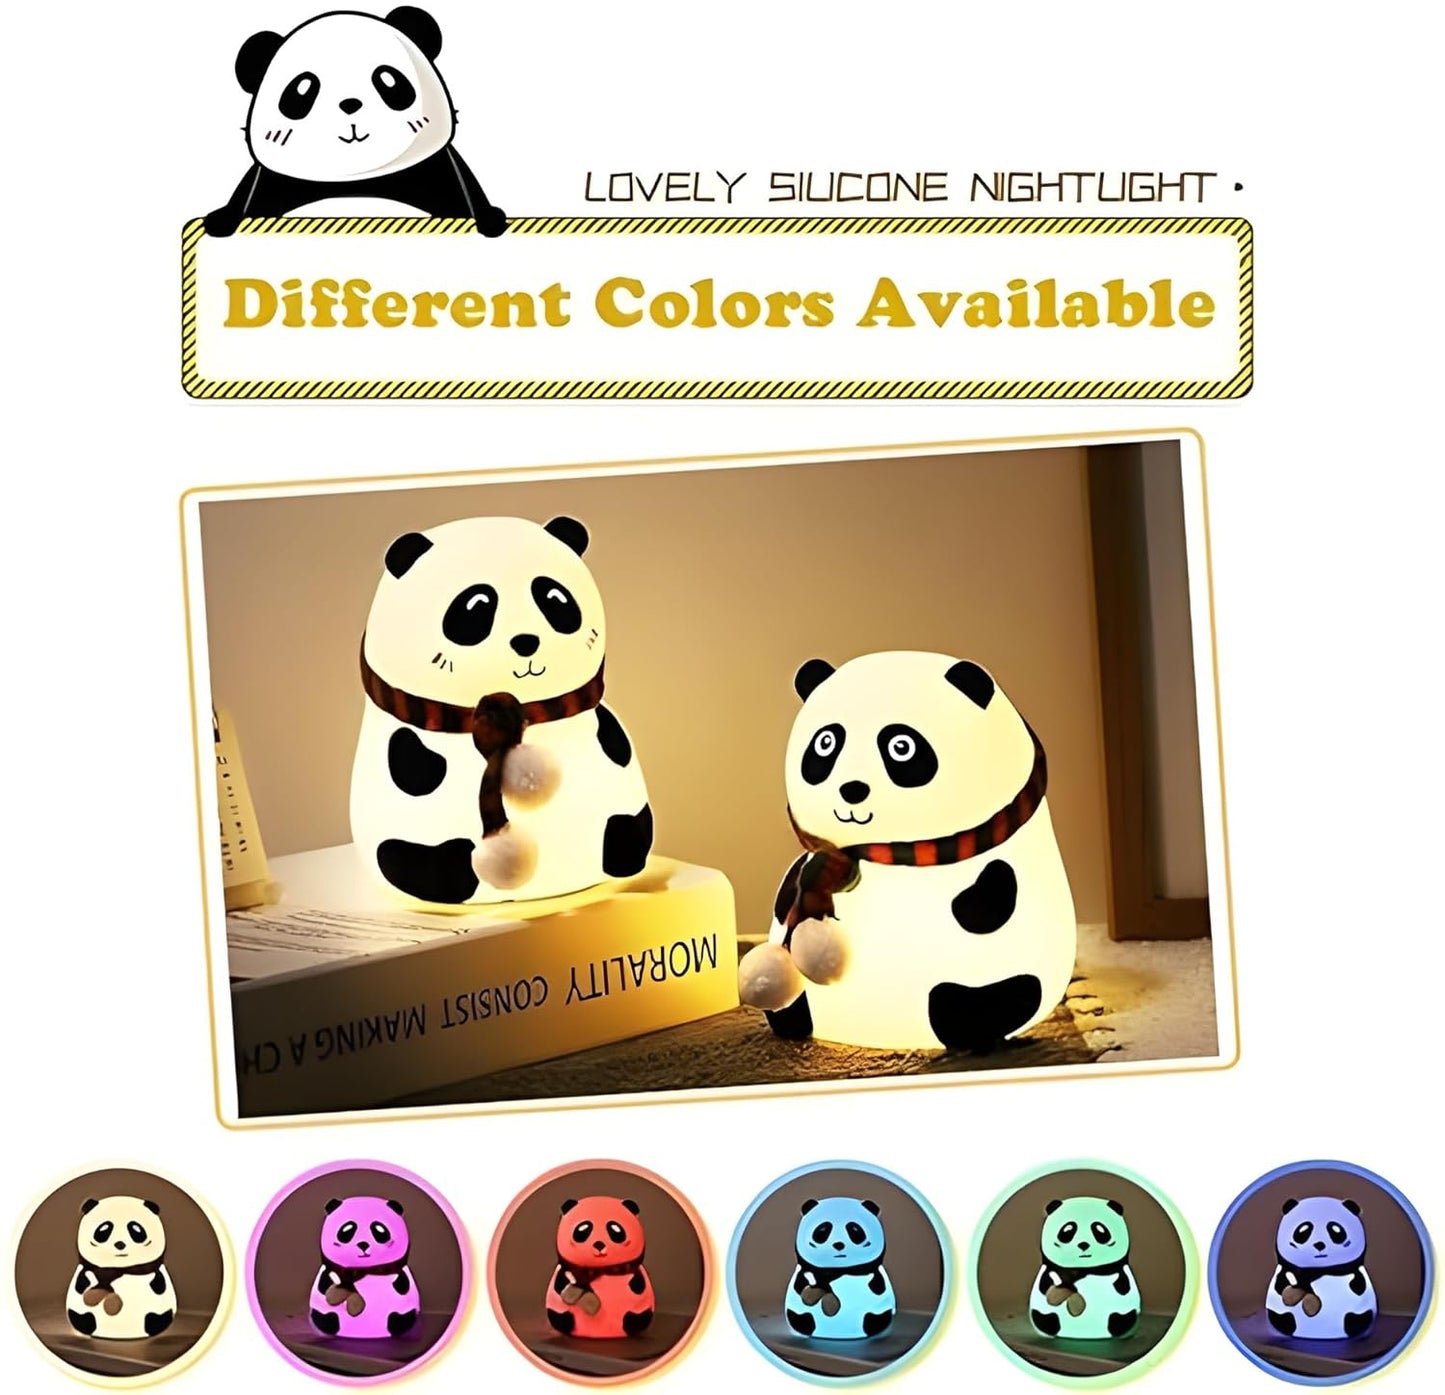 Rechargeable Panda Lamp, Cute Silicone Kawaii Night Lamp for Bedroom